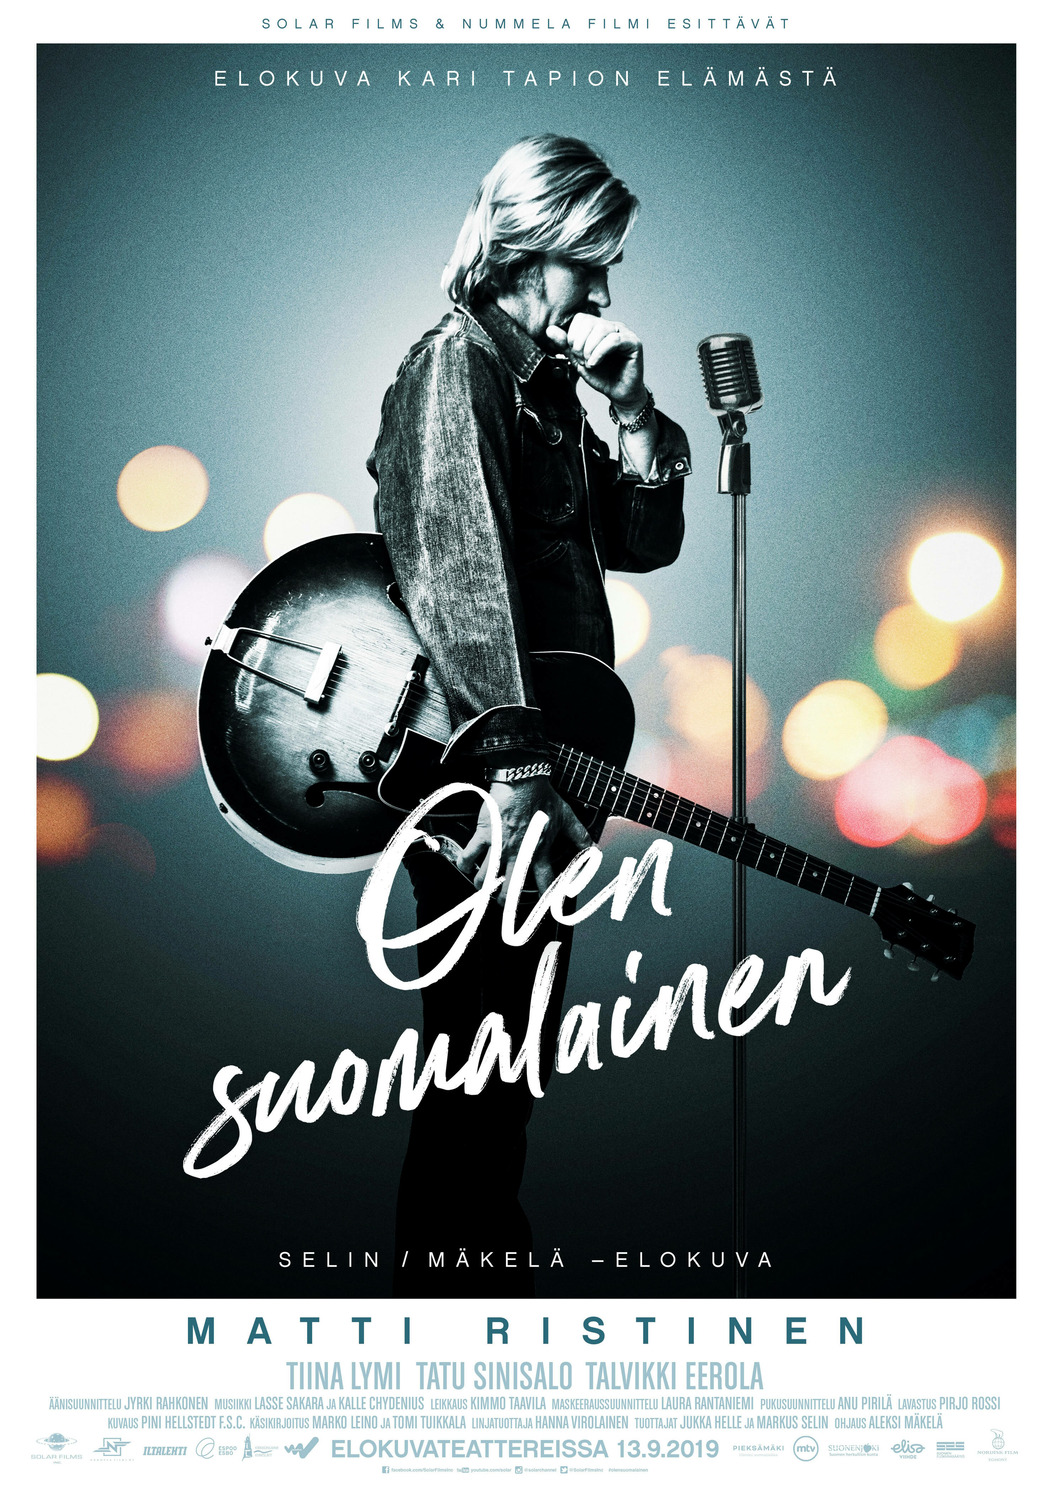 Extra Large Movie Poster Image for Olen suomalainen 